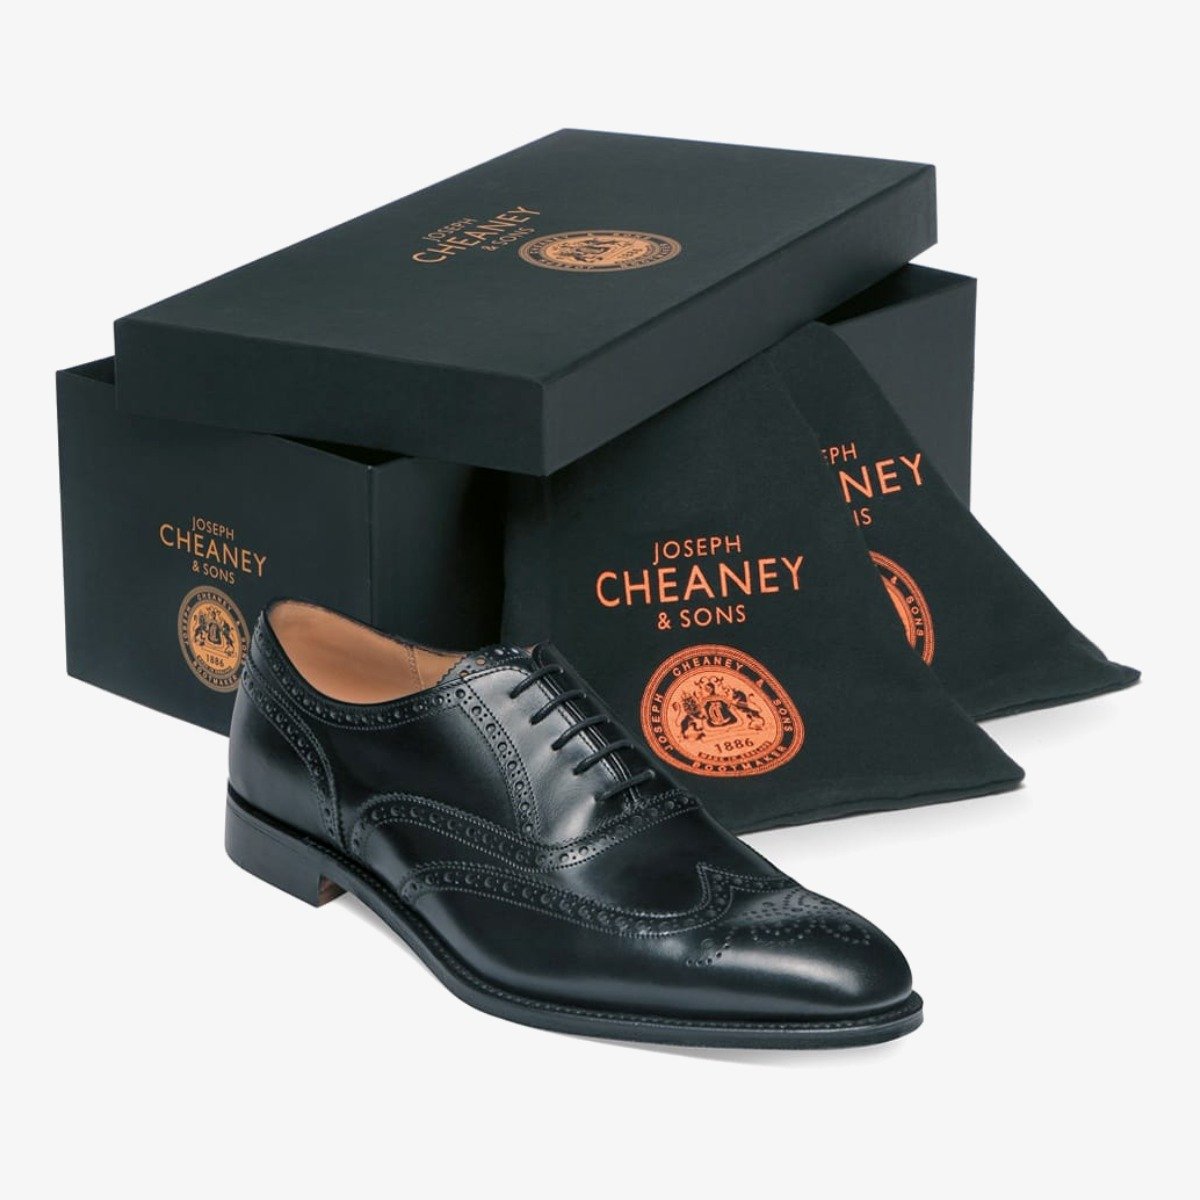 Cheaney Broad II black brogue oxford shoes